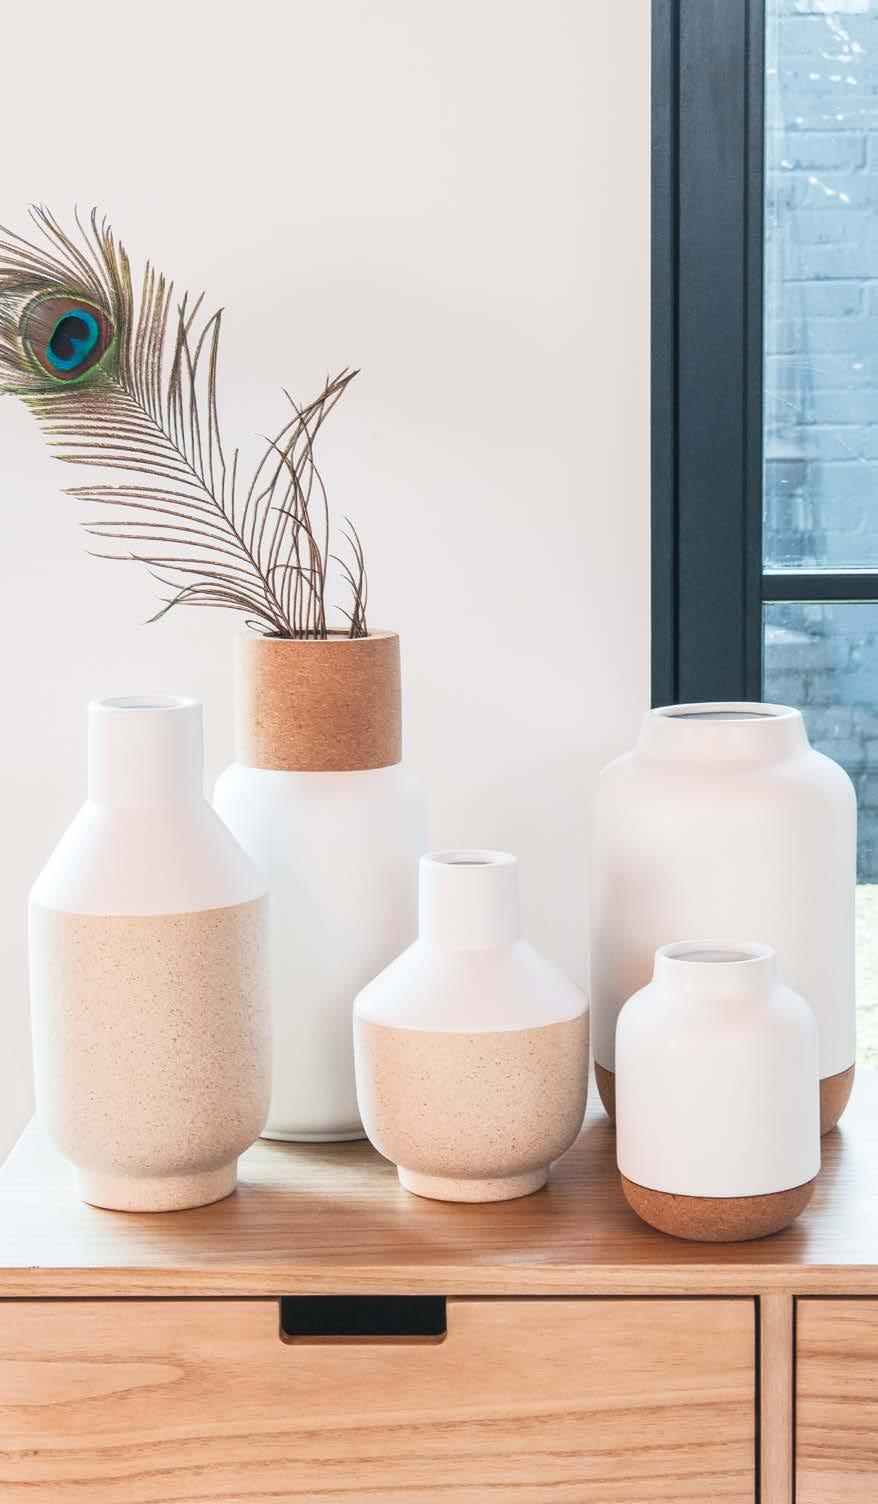 Our choice Natural materials are still the trend. Combine with smooth white or a colour of your choice. This combination makes these vases extra special.